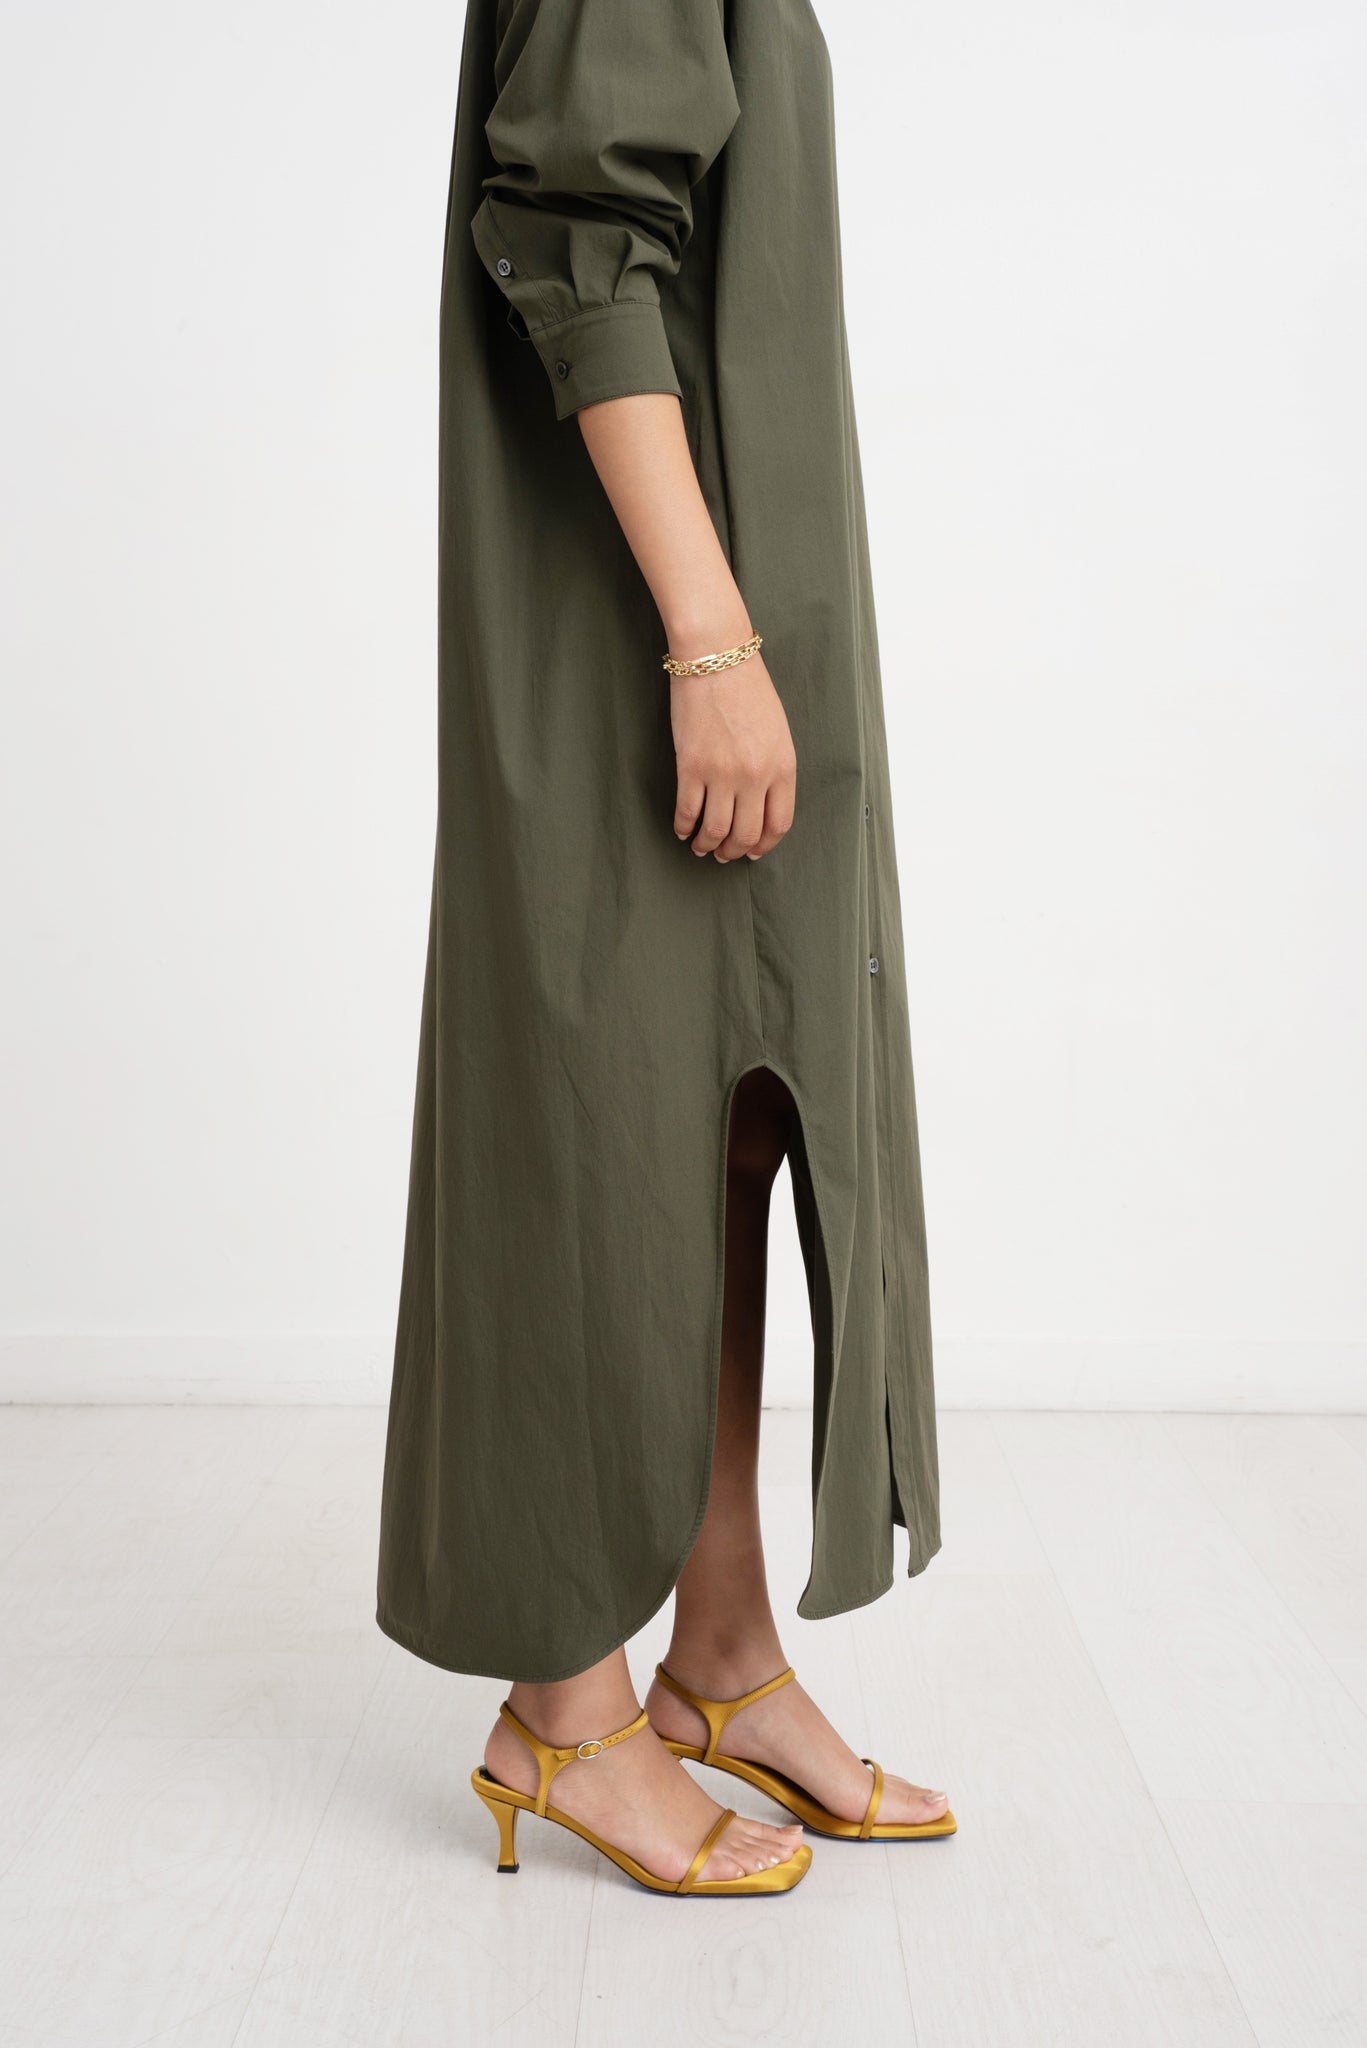 Hache - Cover Me Up Dress, Military Green